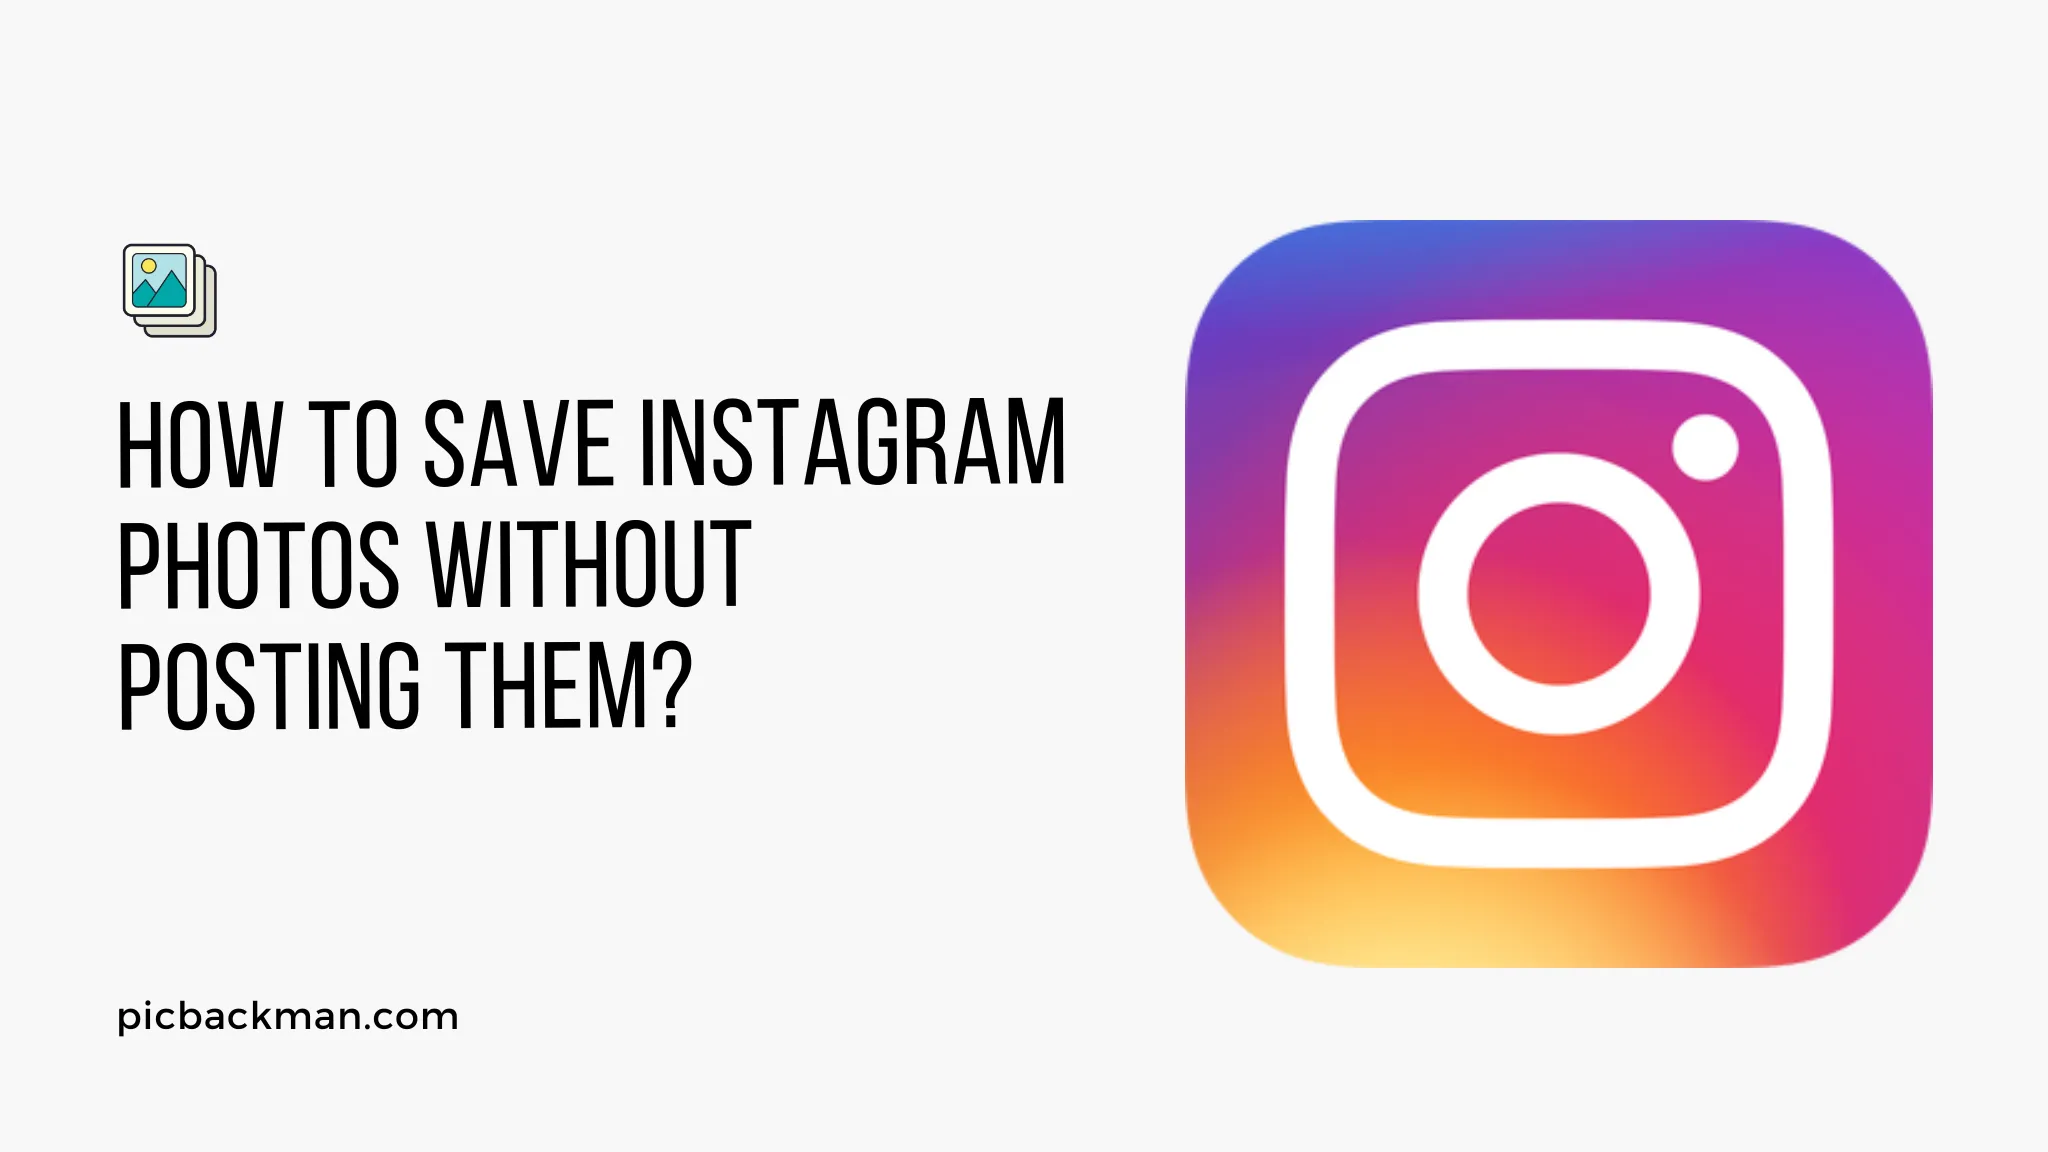 How to Save Instagram Photos Without Posting Them